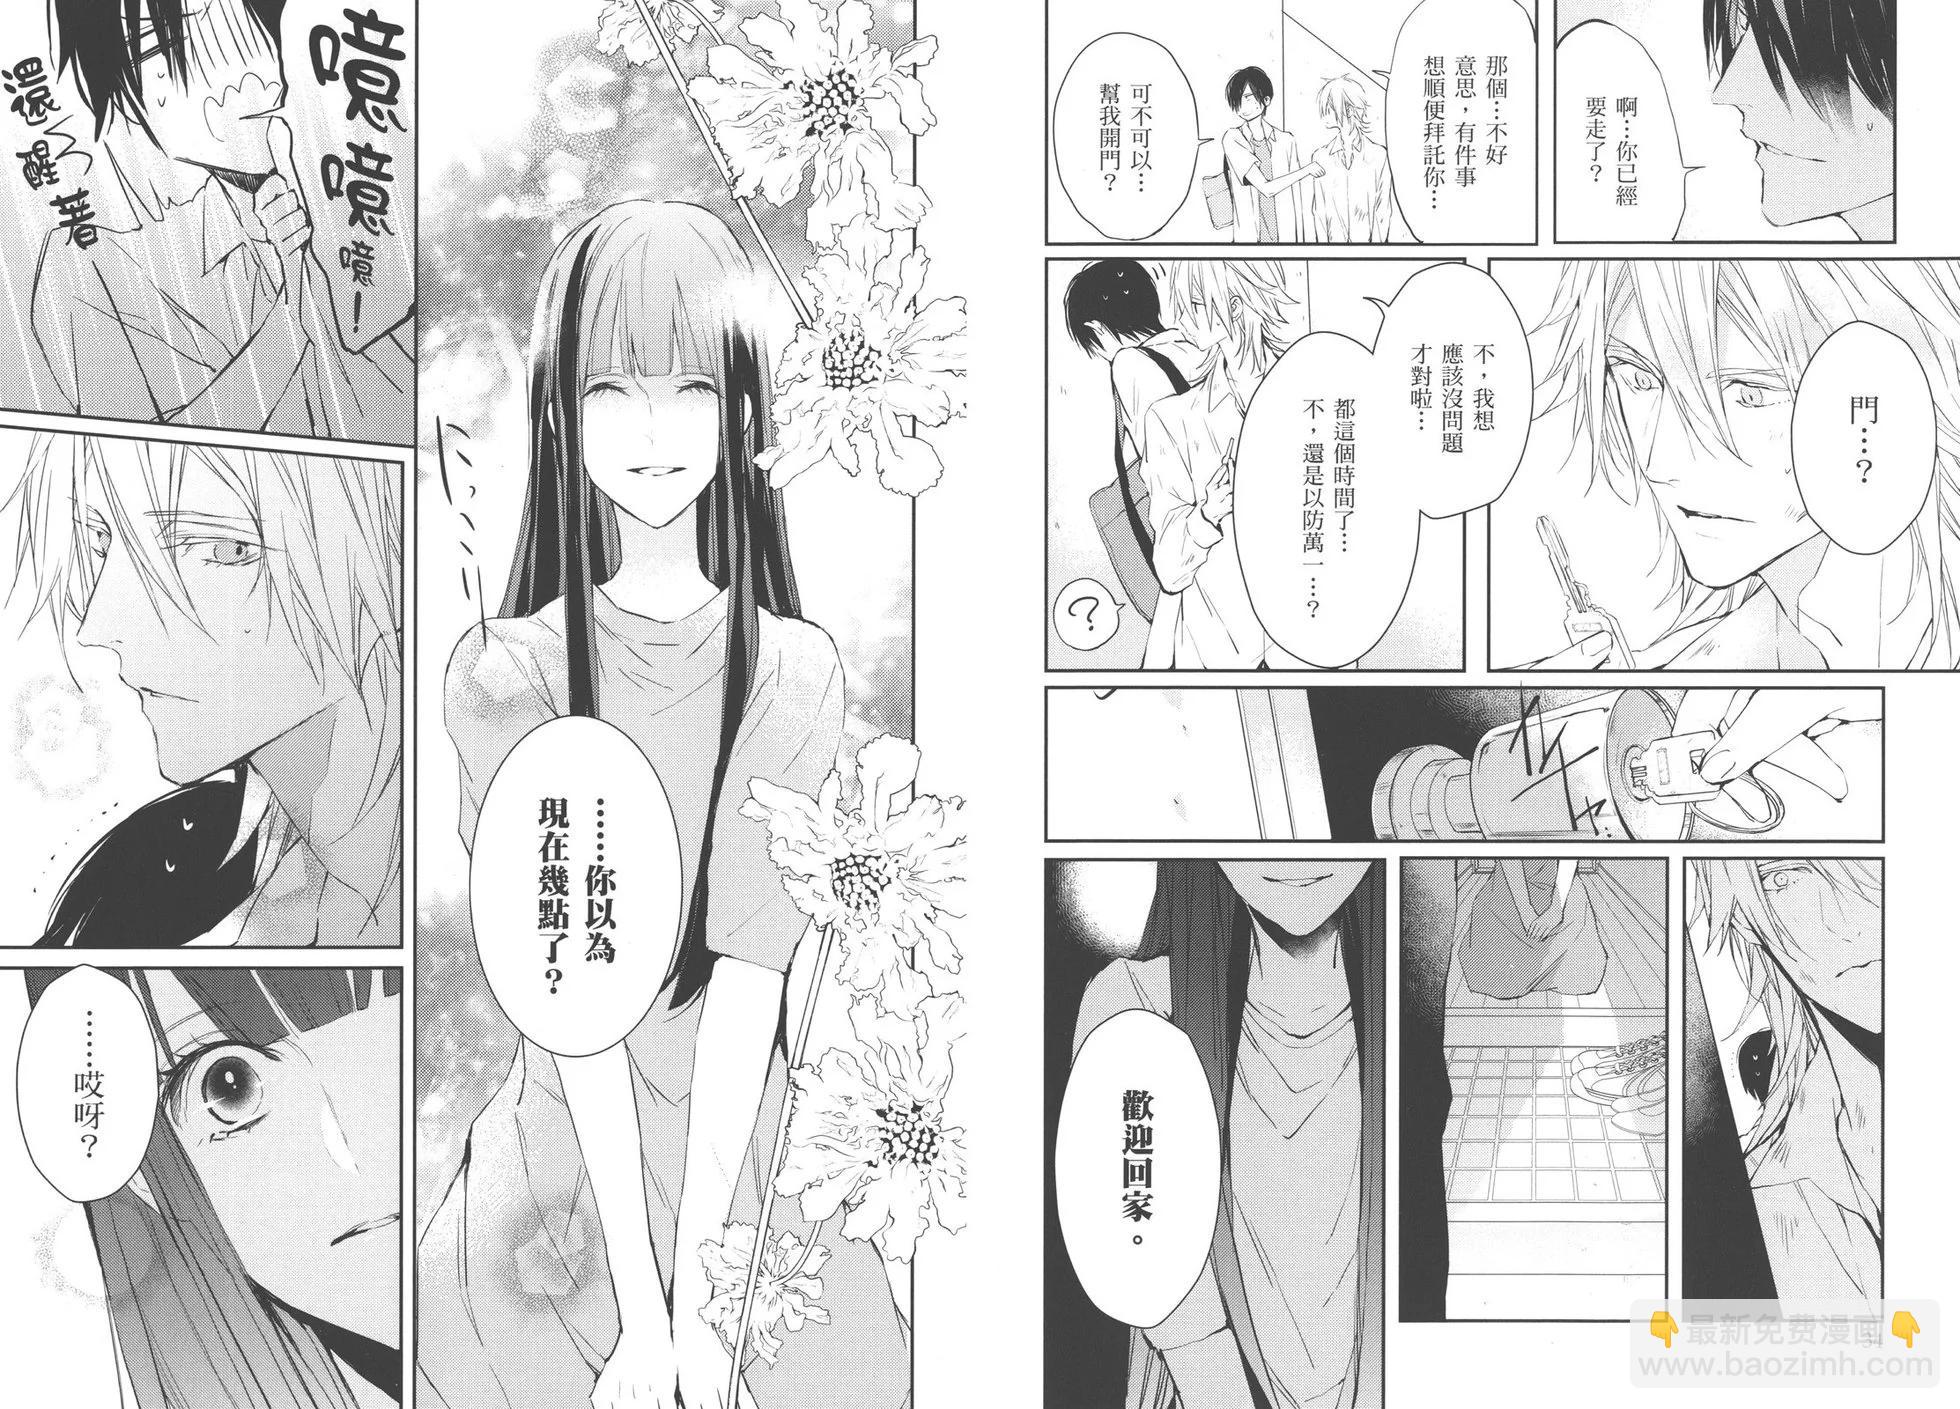 Bloody Mary - 第04卷(1/2) - 4